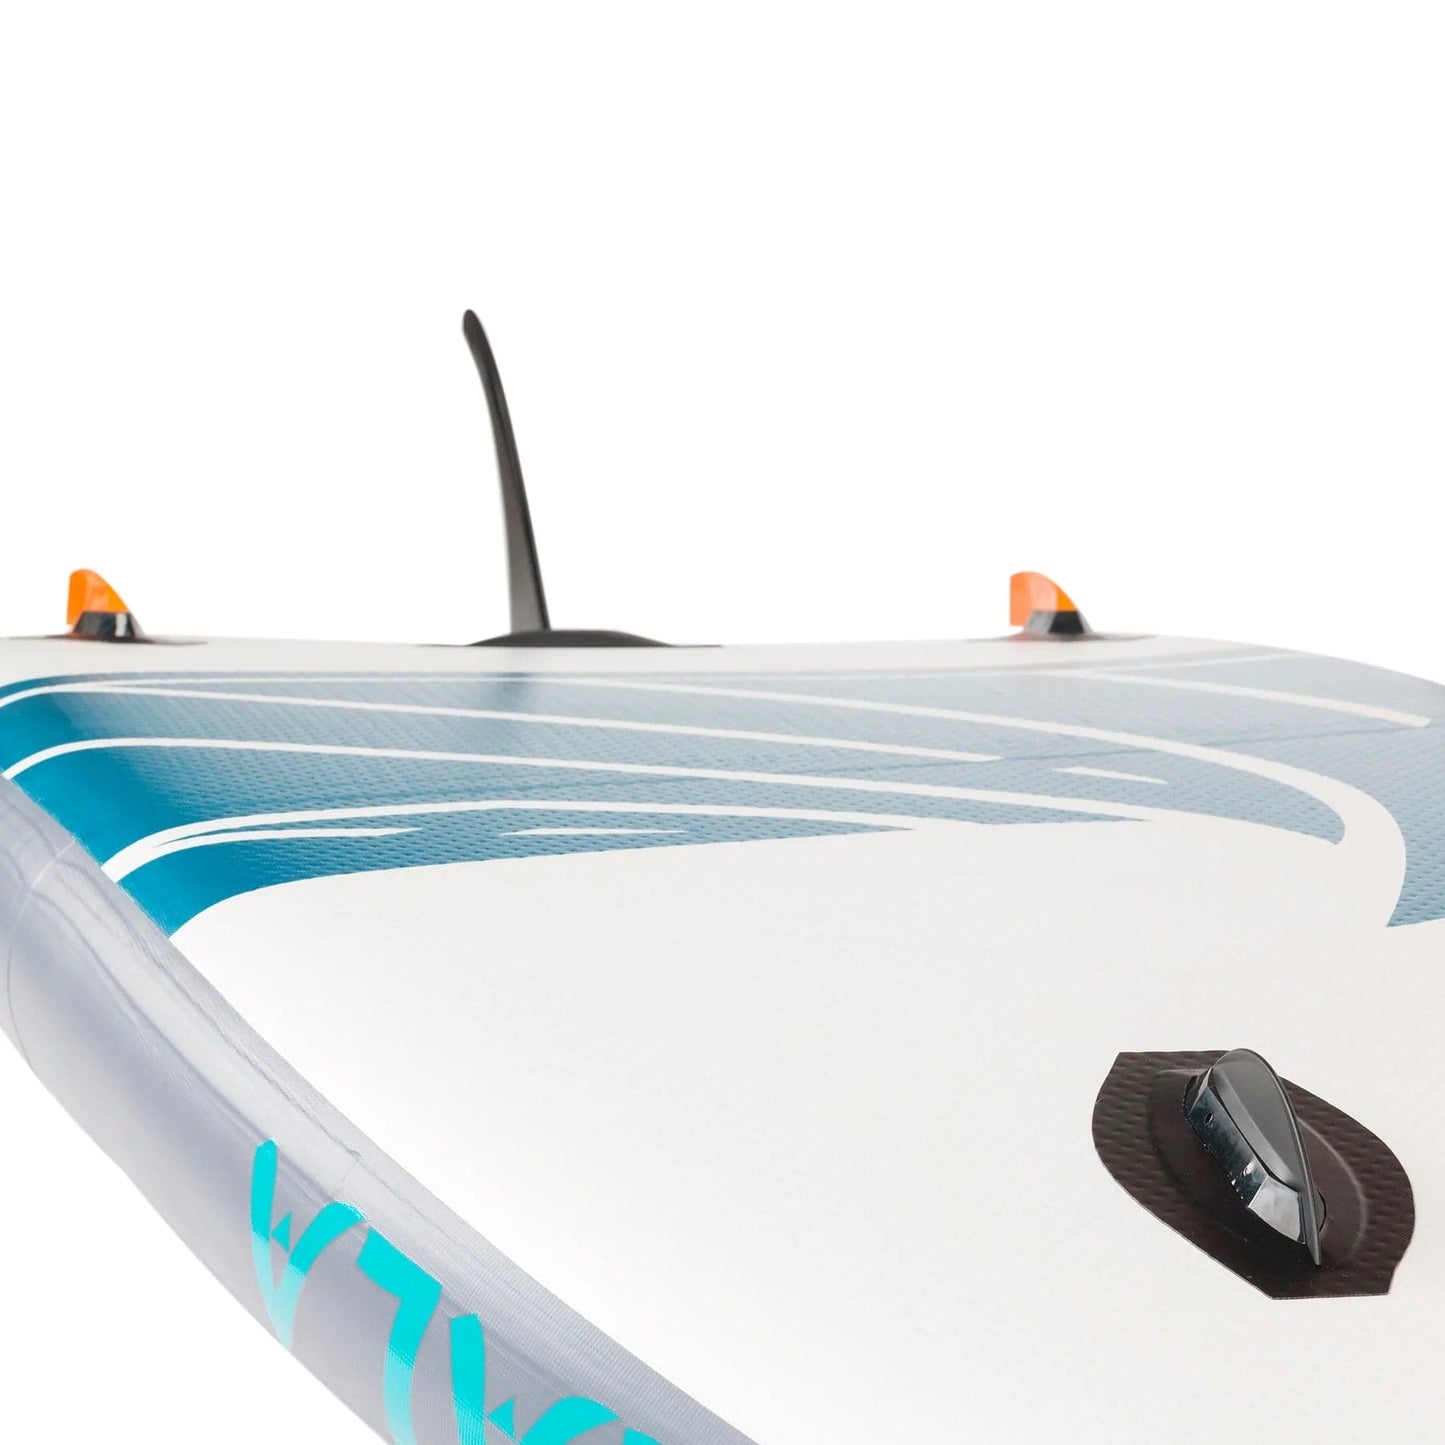 Featuring the Gummy Flex 1.5" Fin sup accessory, sup fin manufactured by Hala shown here from a second angle.